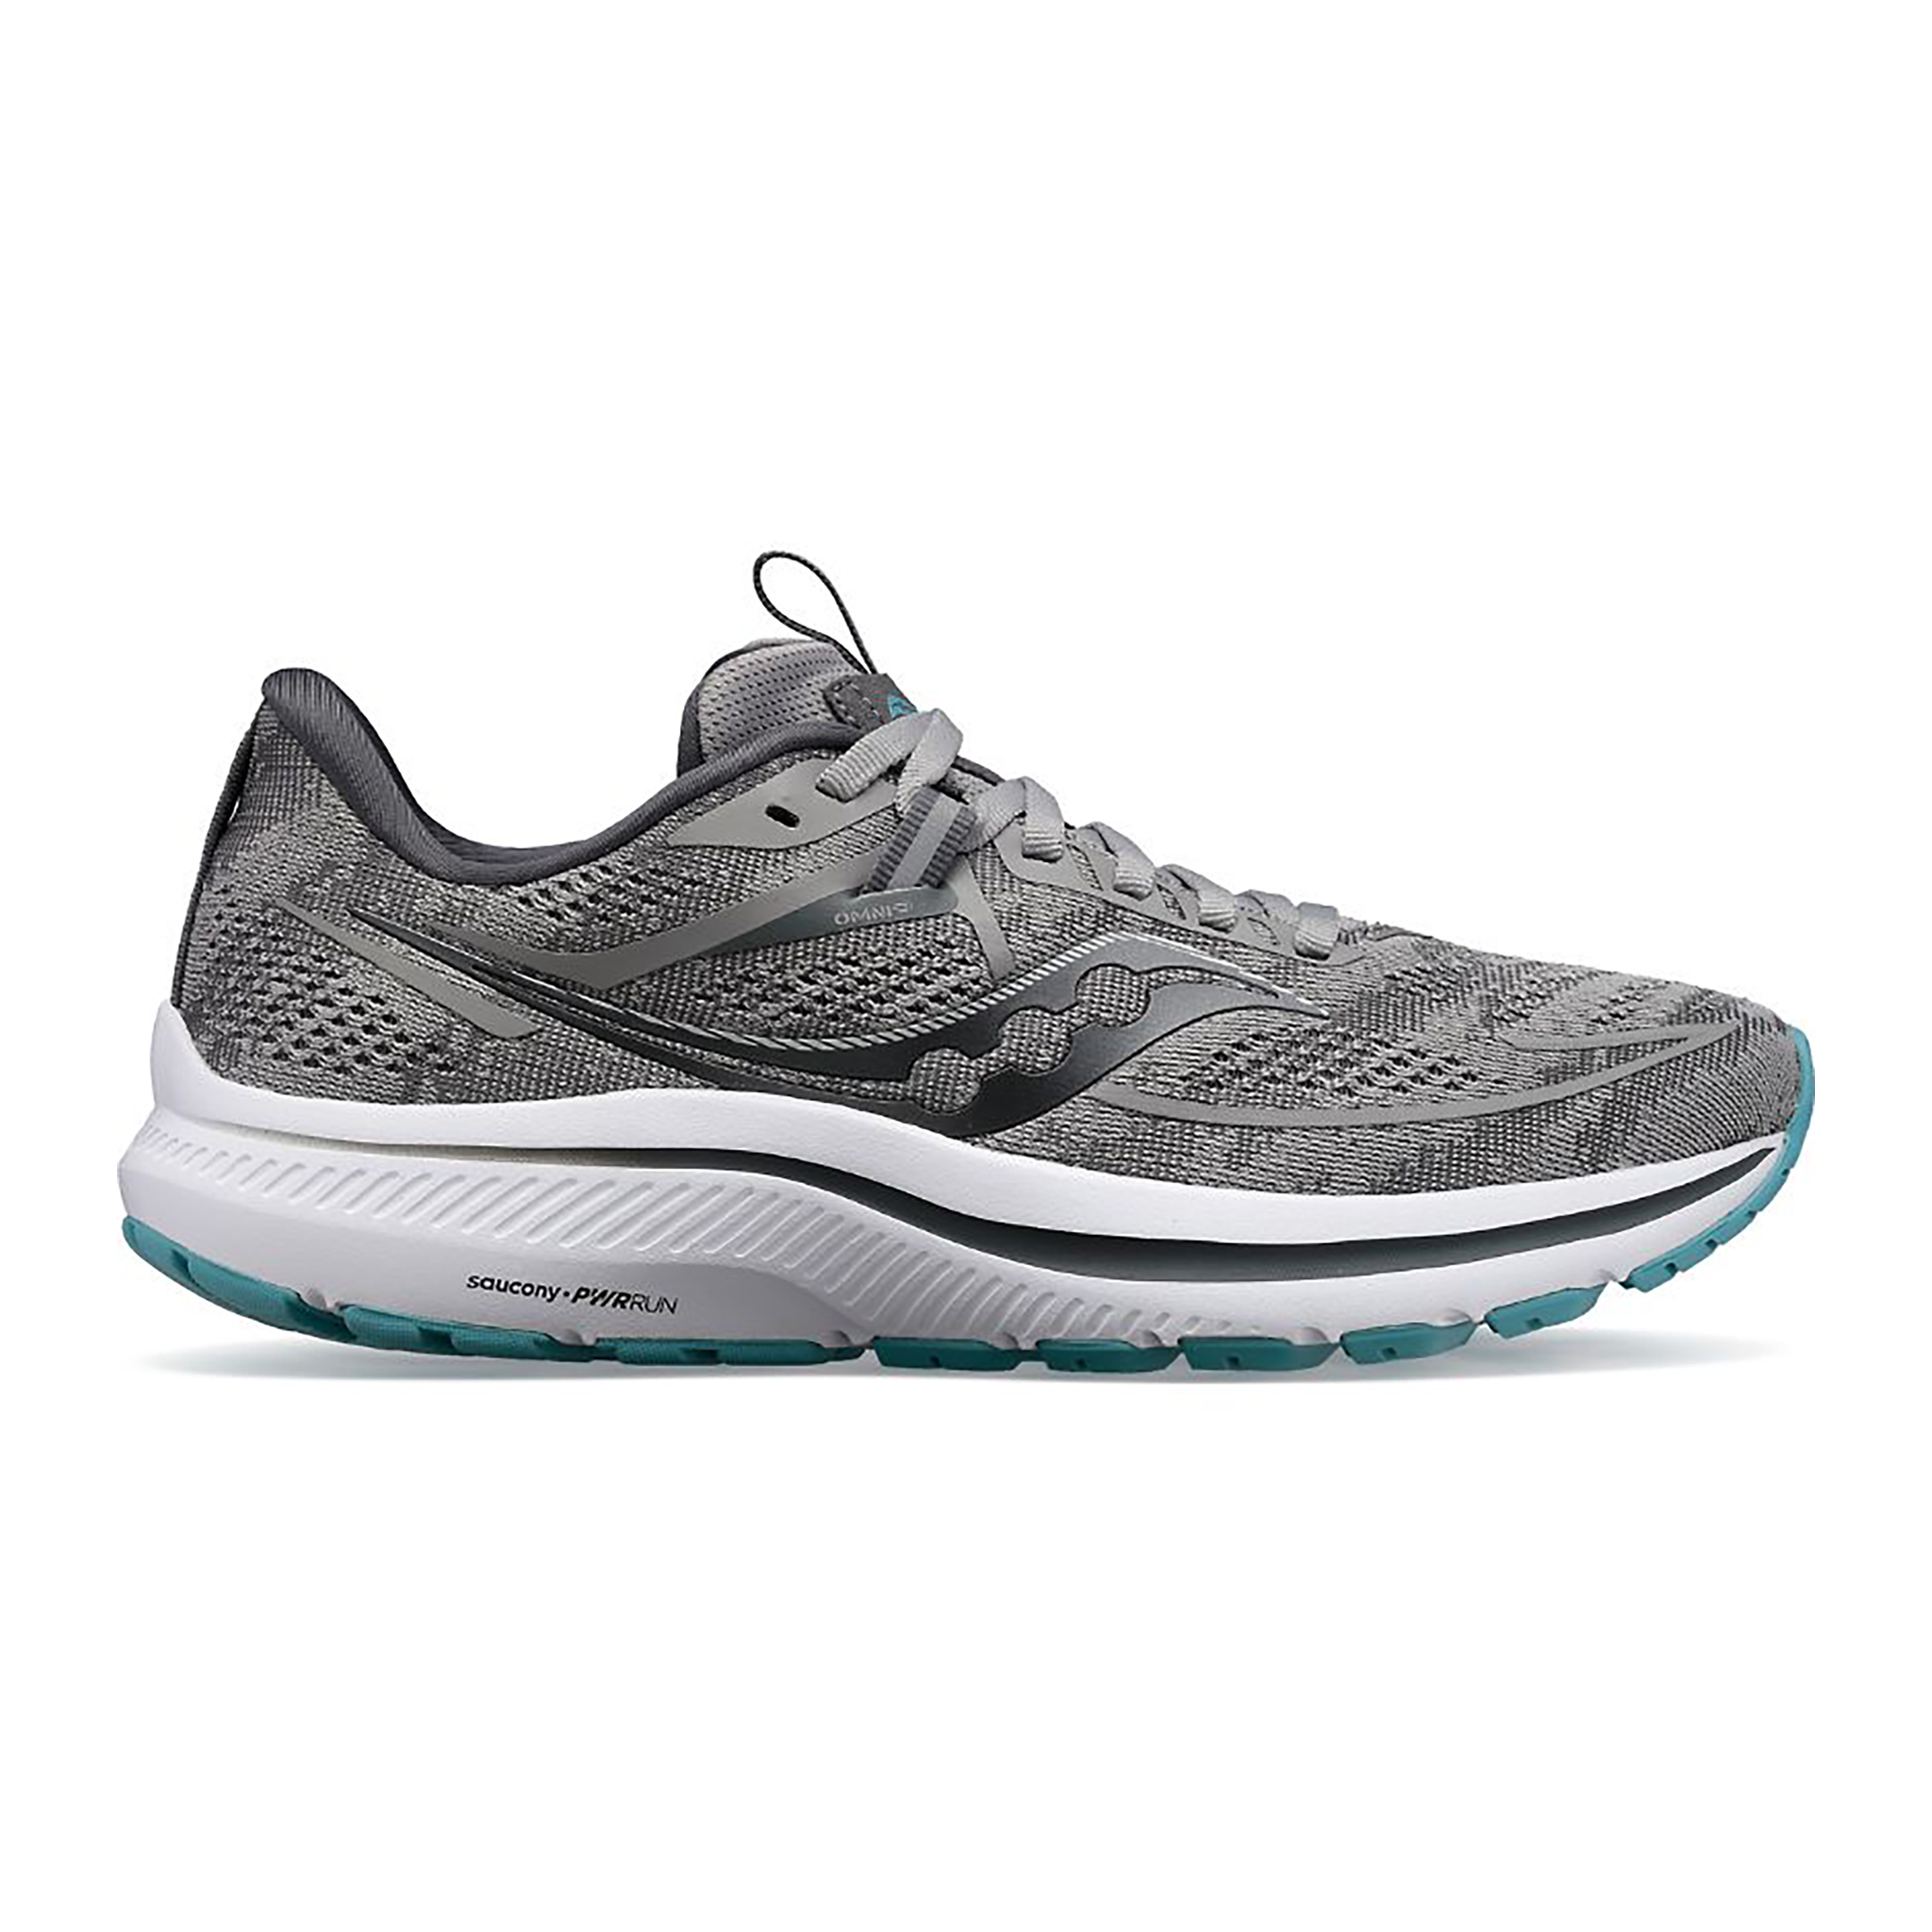 WOMEN'S SAUCONY OMNI 21 | Performance Running Outfitters